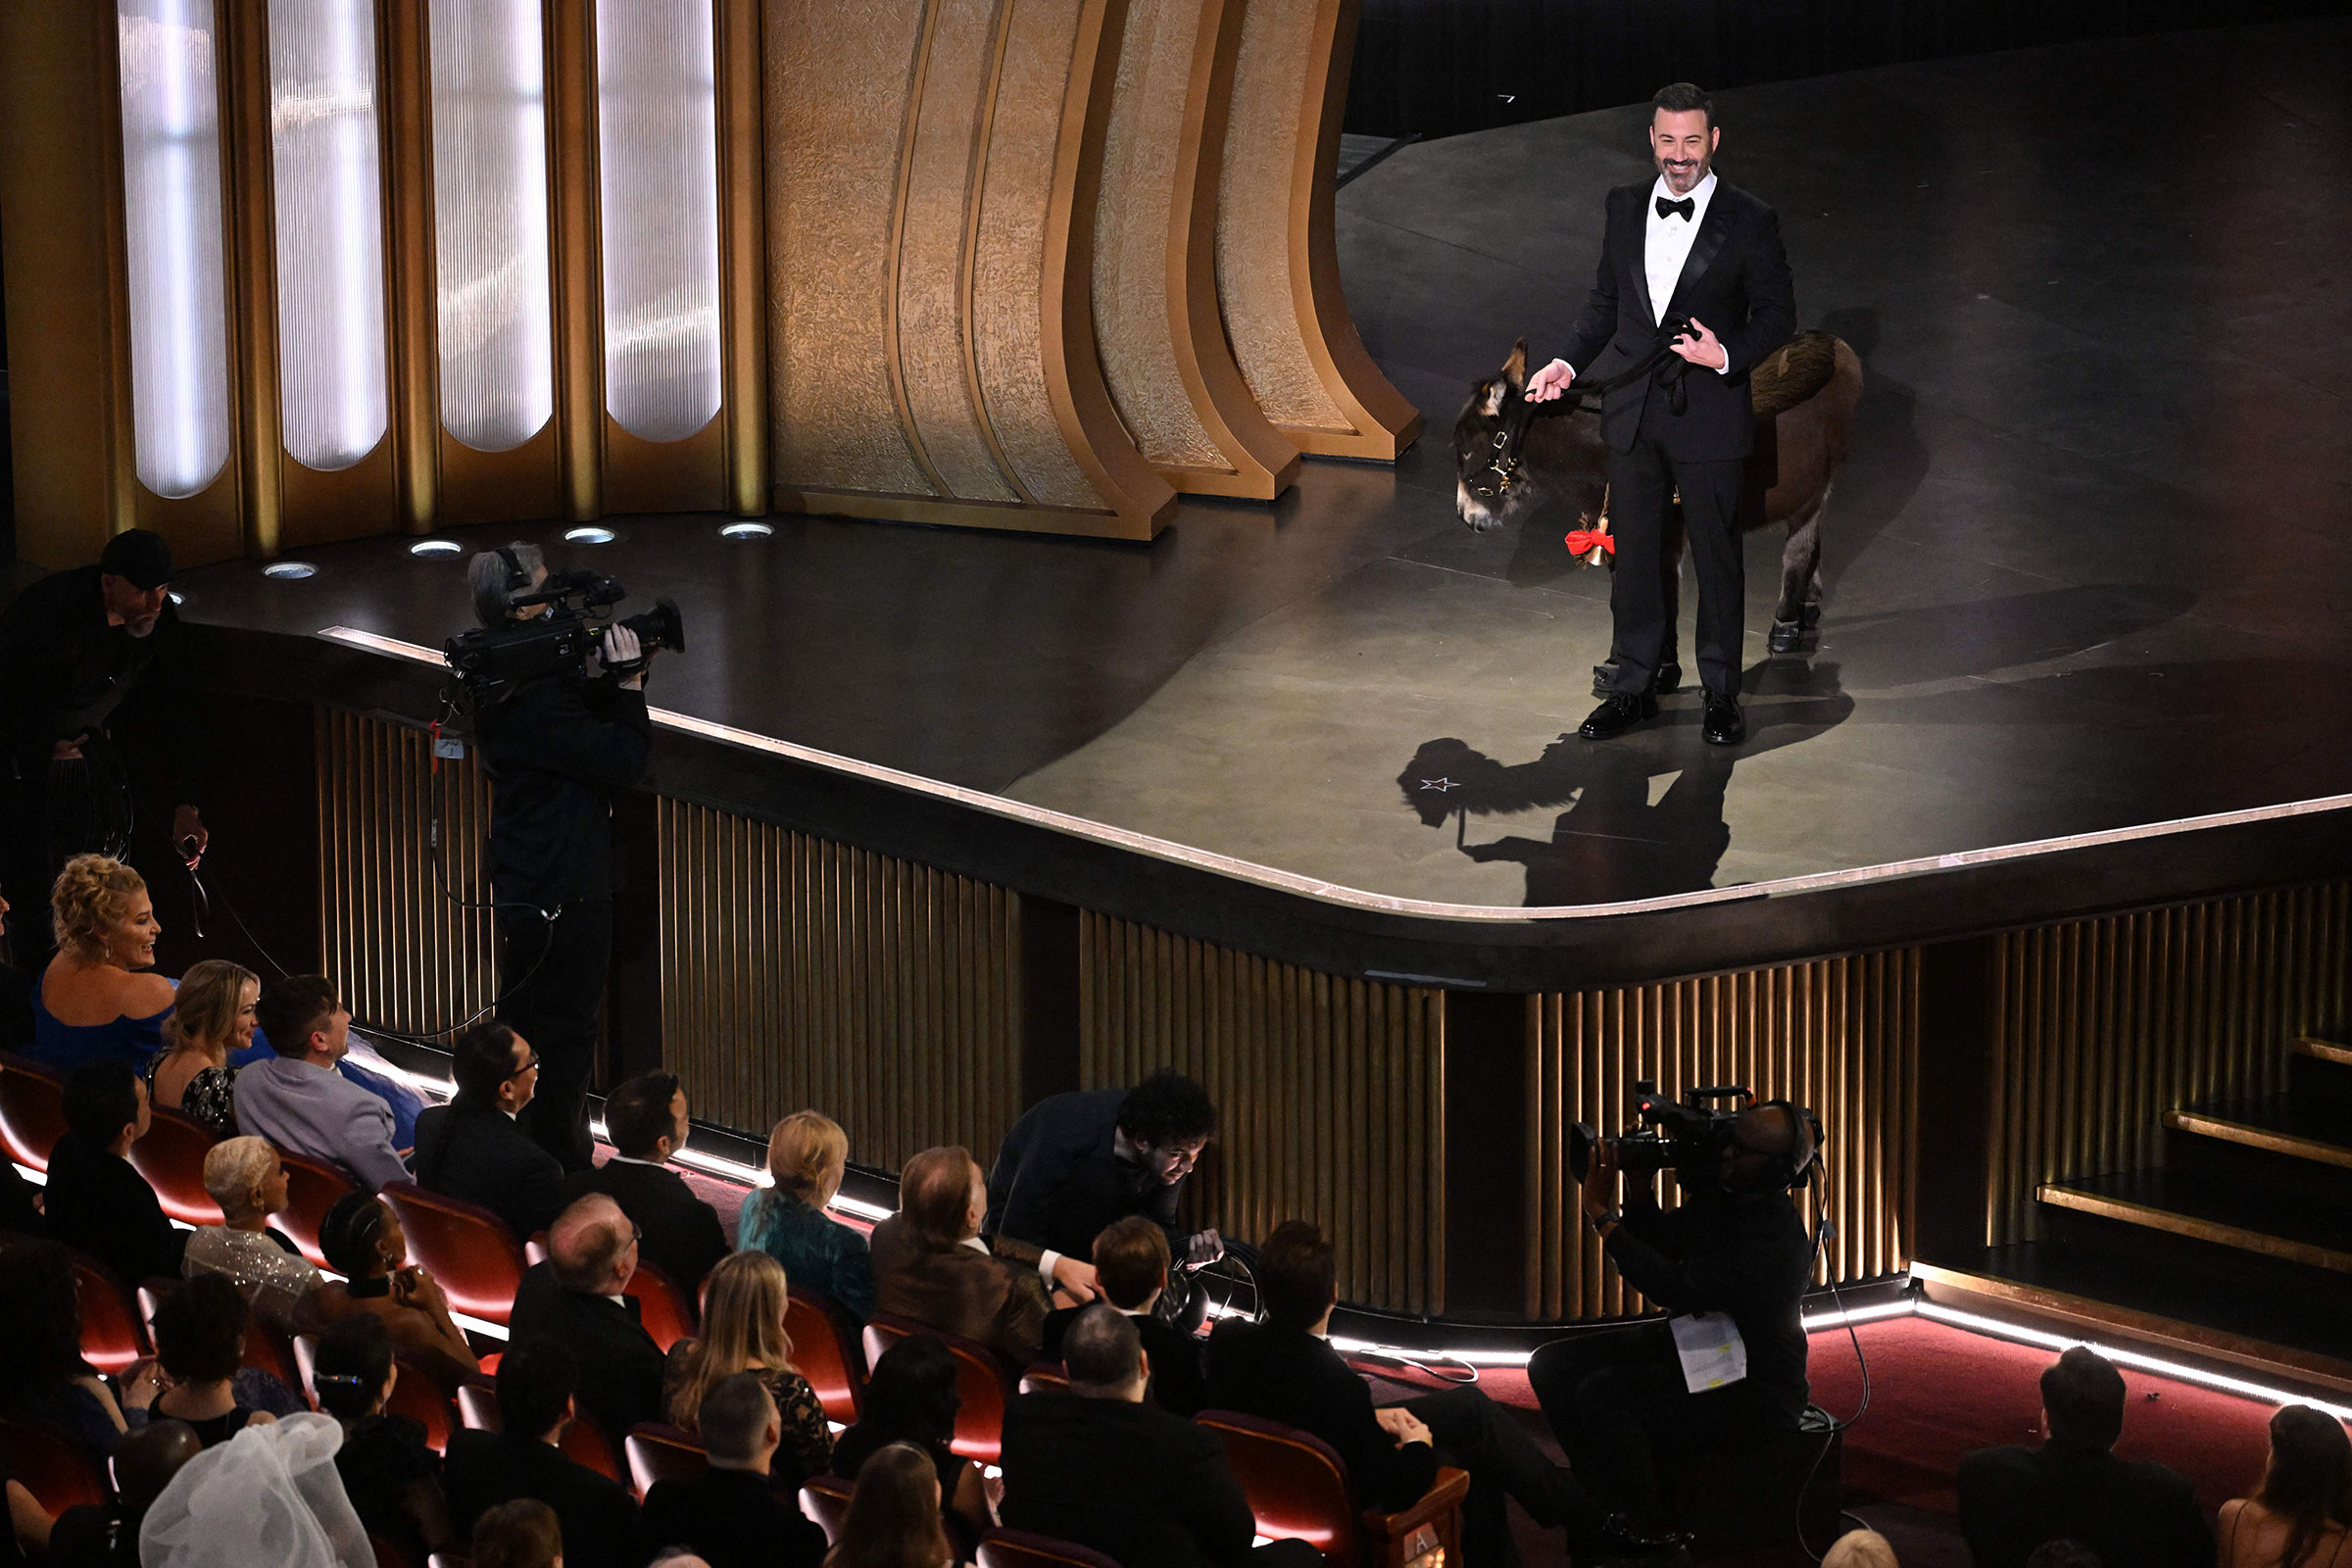 Host Jimmy Kimmel walks onstage with a donkey during the 95th Annual Academy Awards at the Dolby Theatre in Hollywood. (Patrick T. Fallon—AFP/Getty Images)